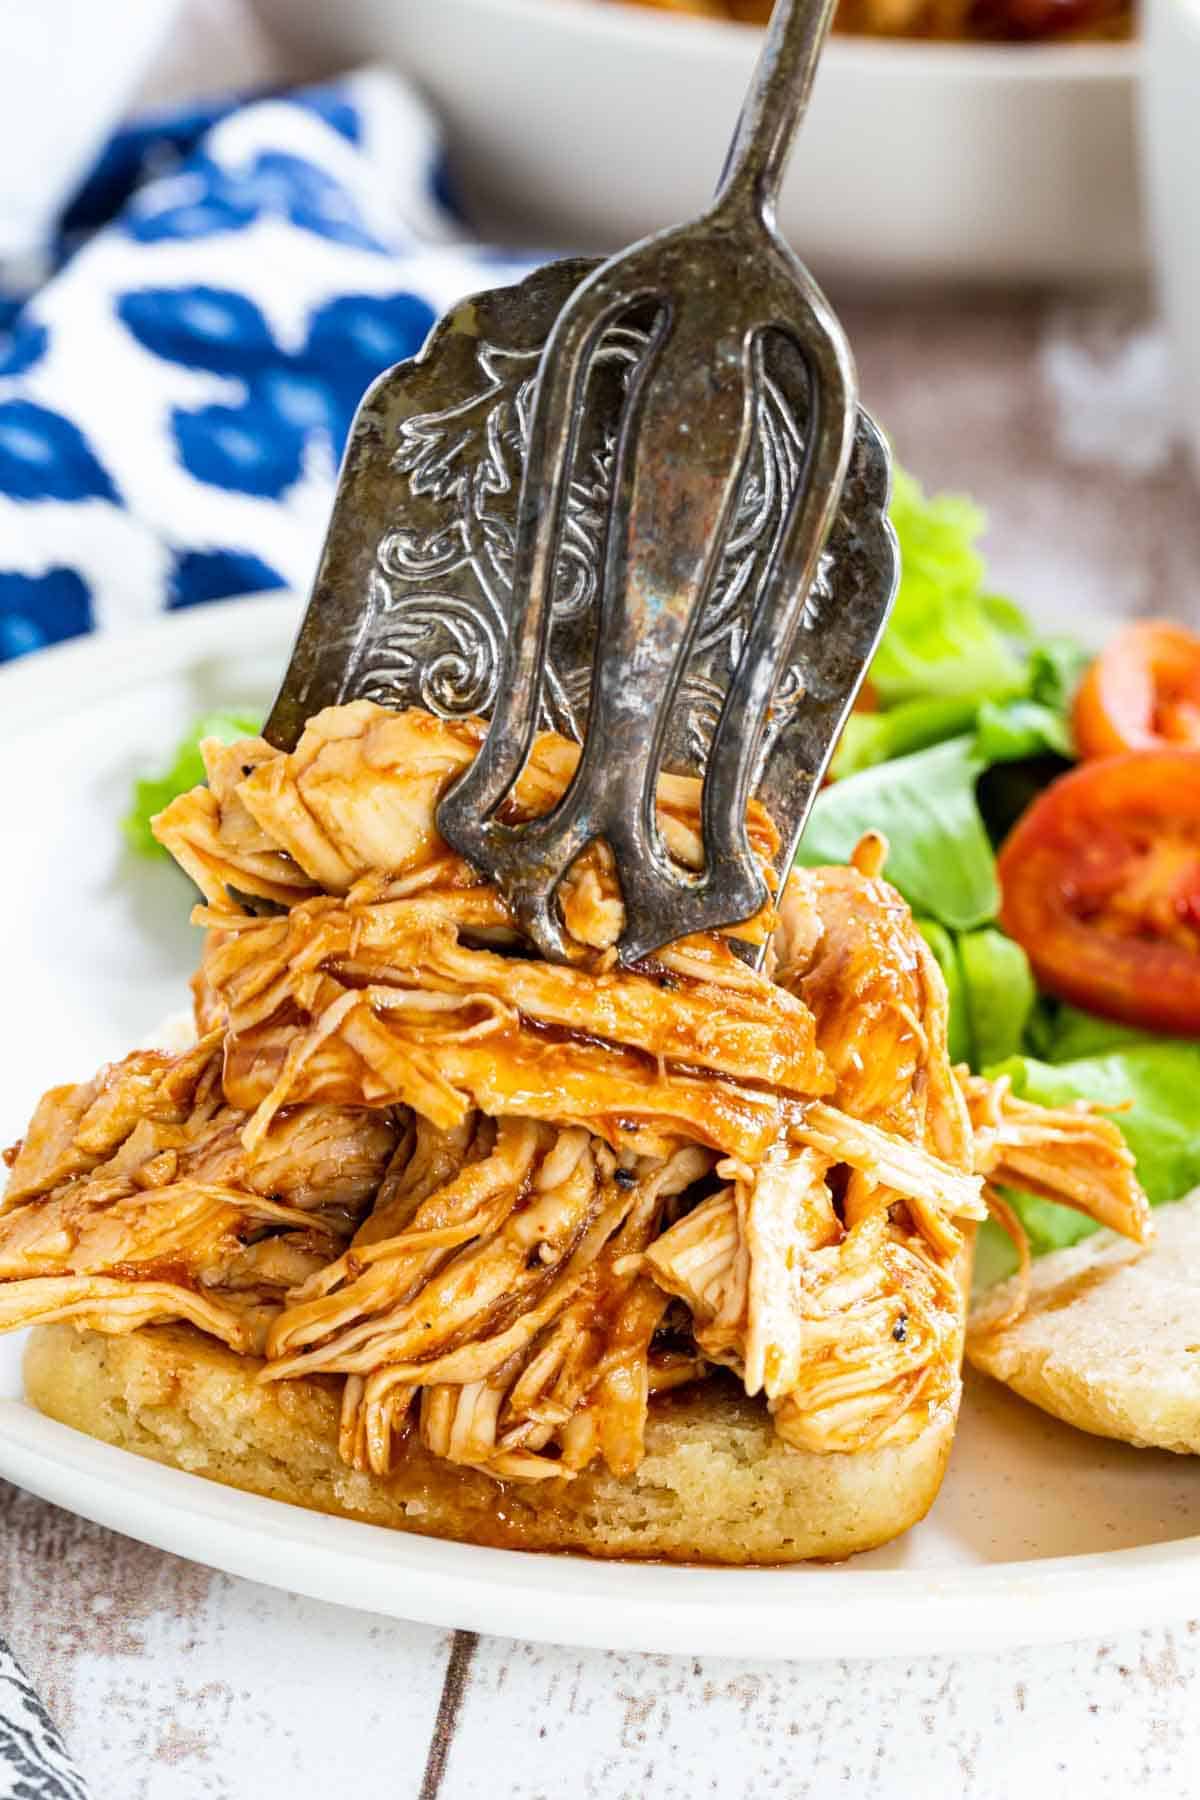 Pulled chicken is piled on top of a bread bun.